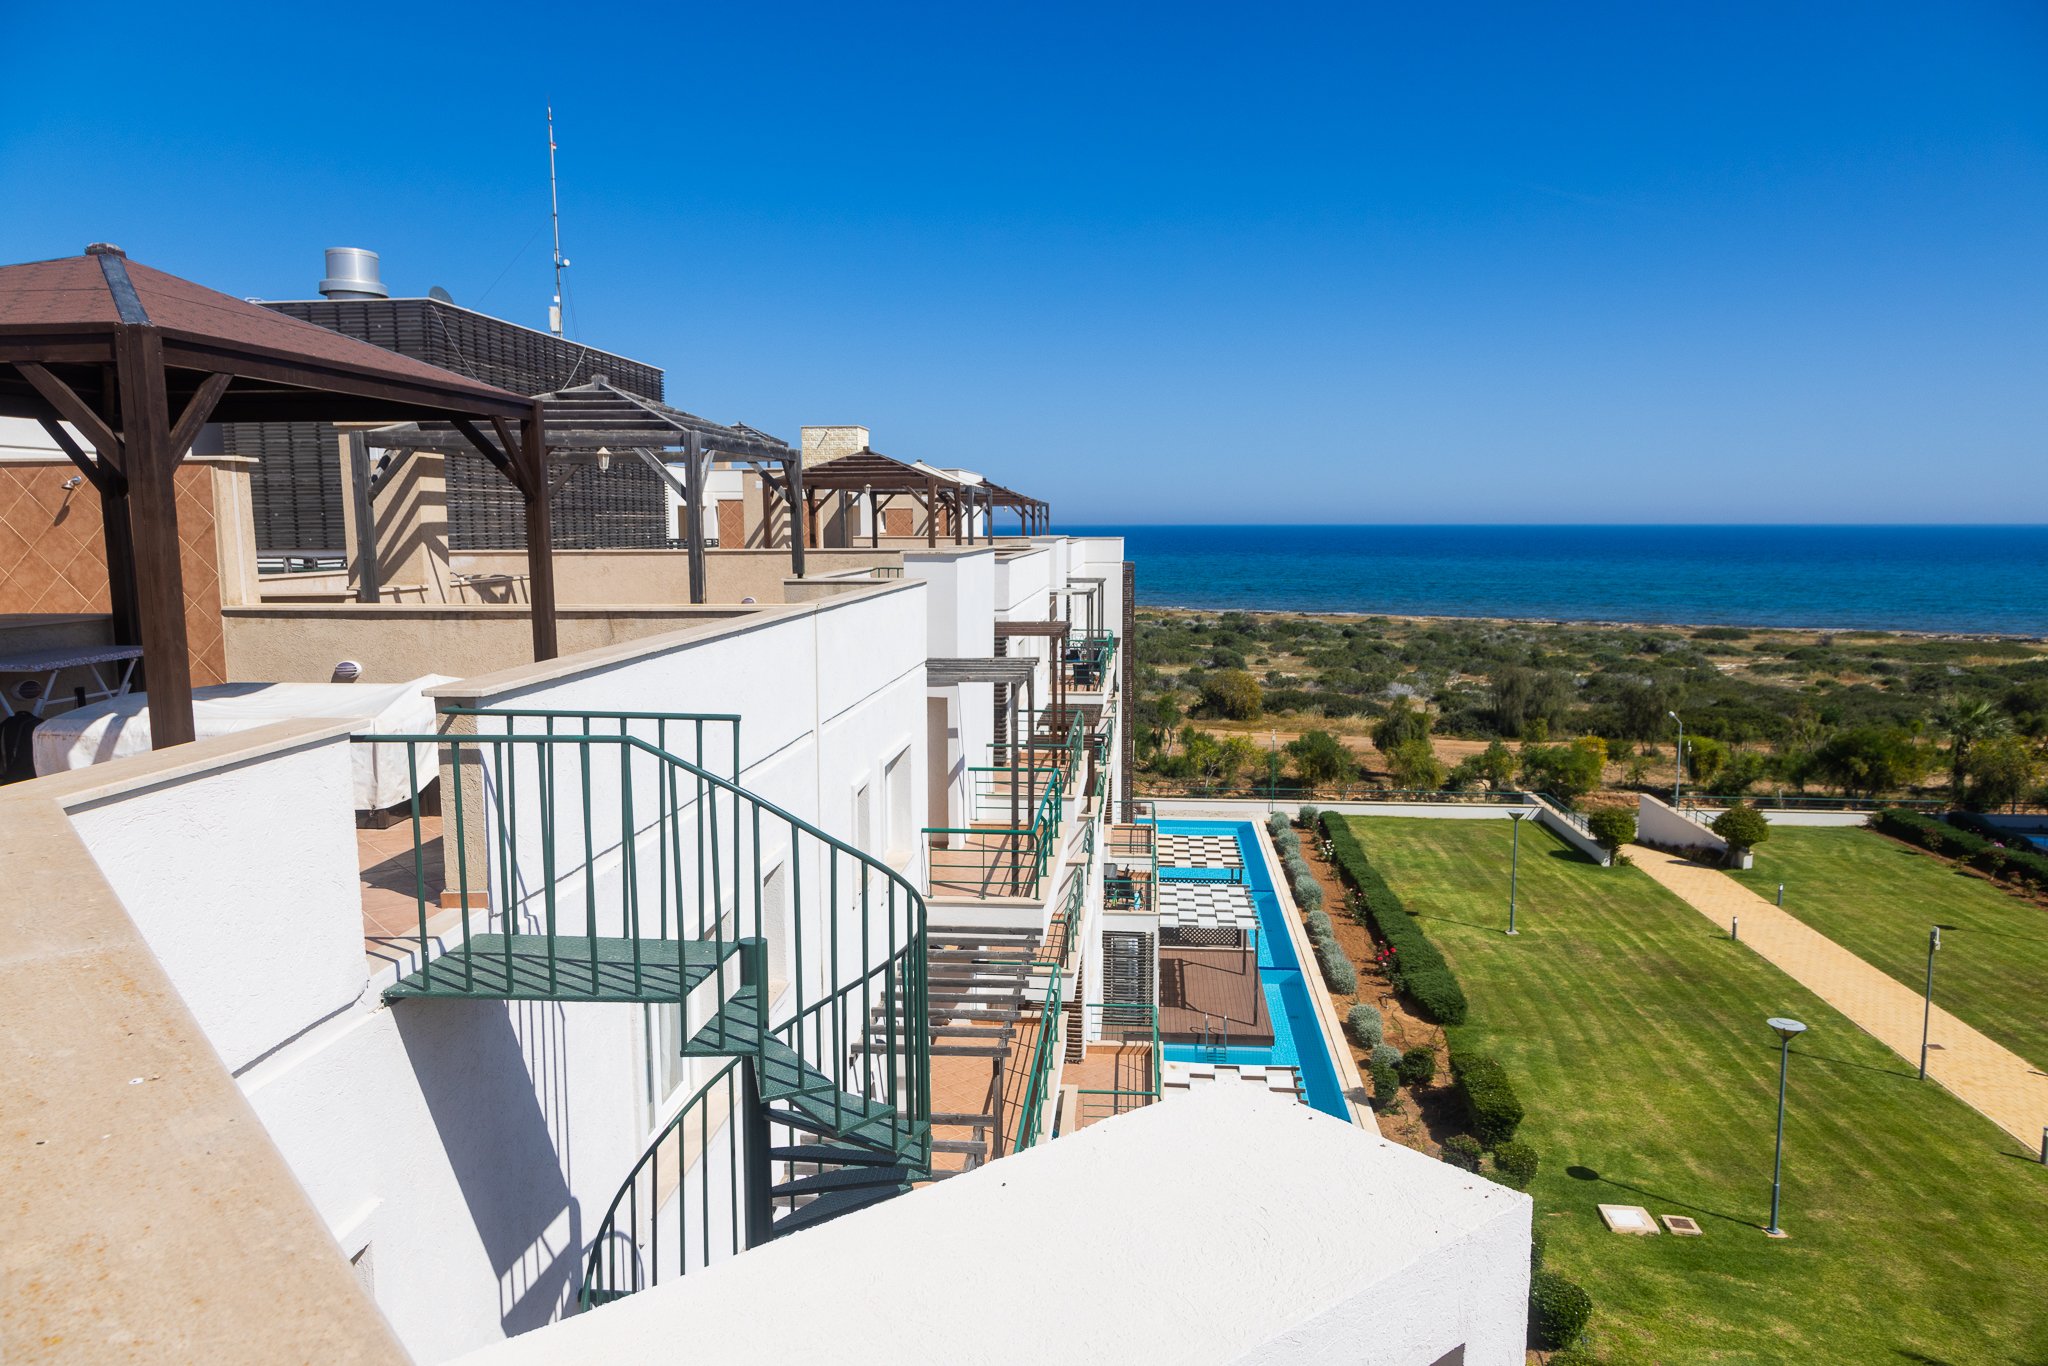 Bright and Airy 3 bed penthouse in resort style development with its own sandy beach., Bafra